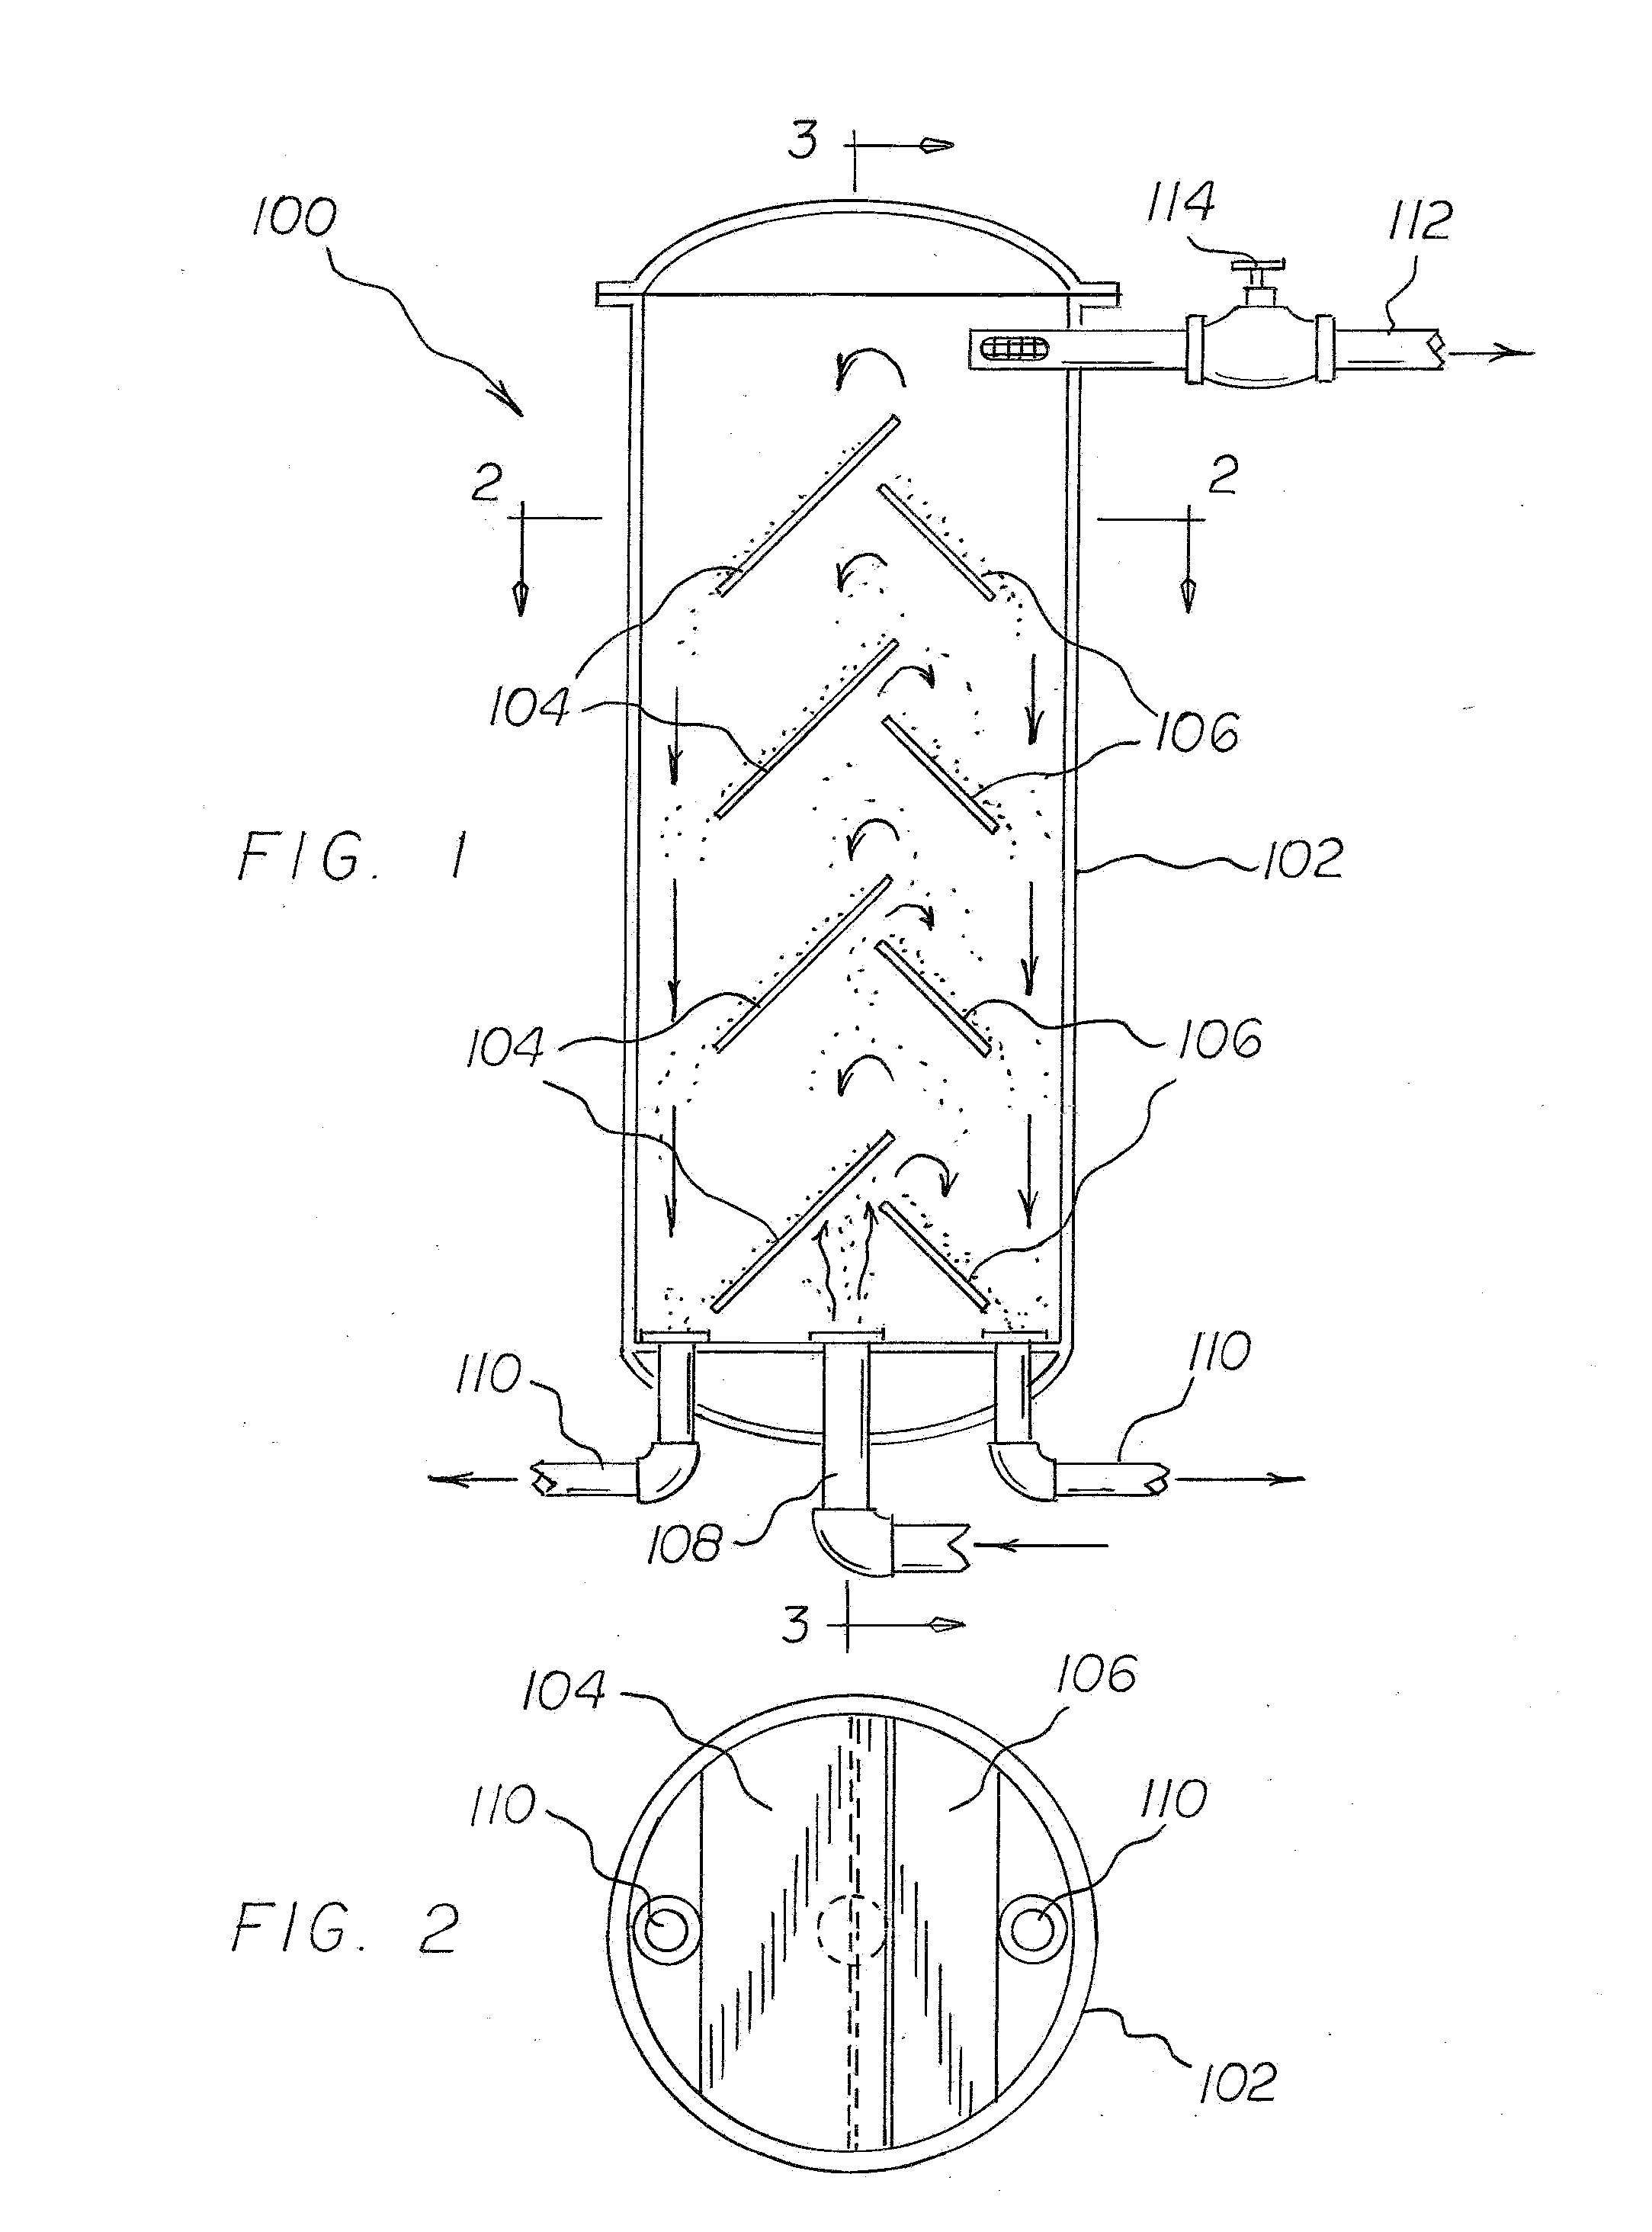 Method and system to separate solids from liquids